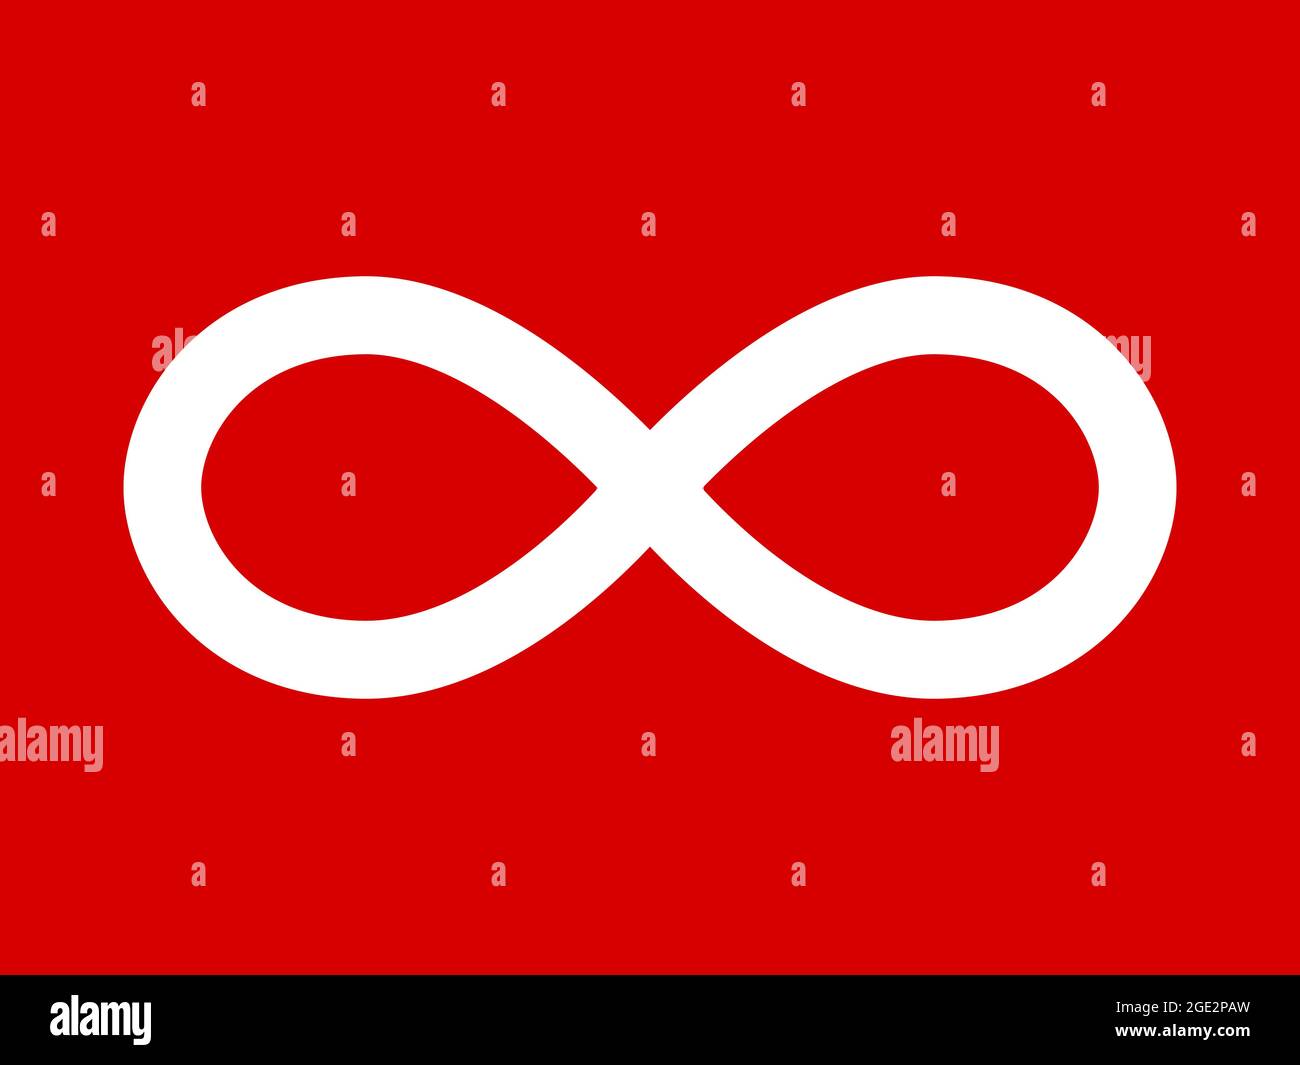 Metis red flag in real proportions and colors, vector image Stock Vector